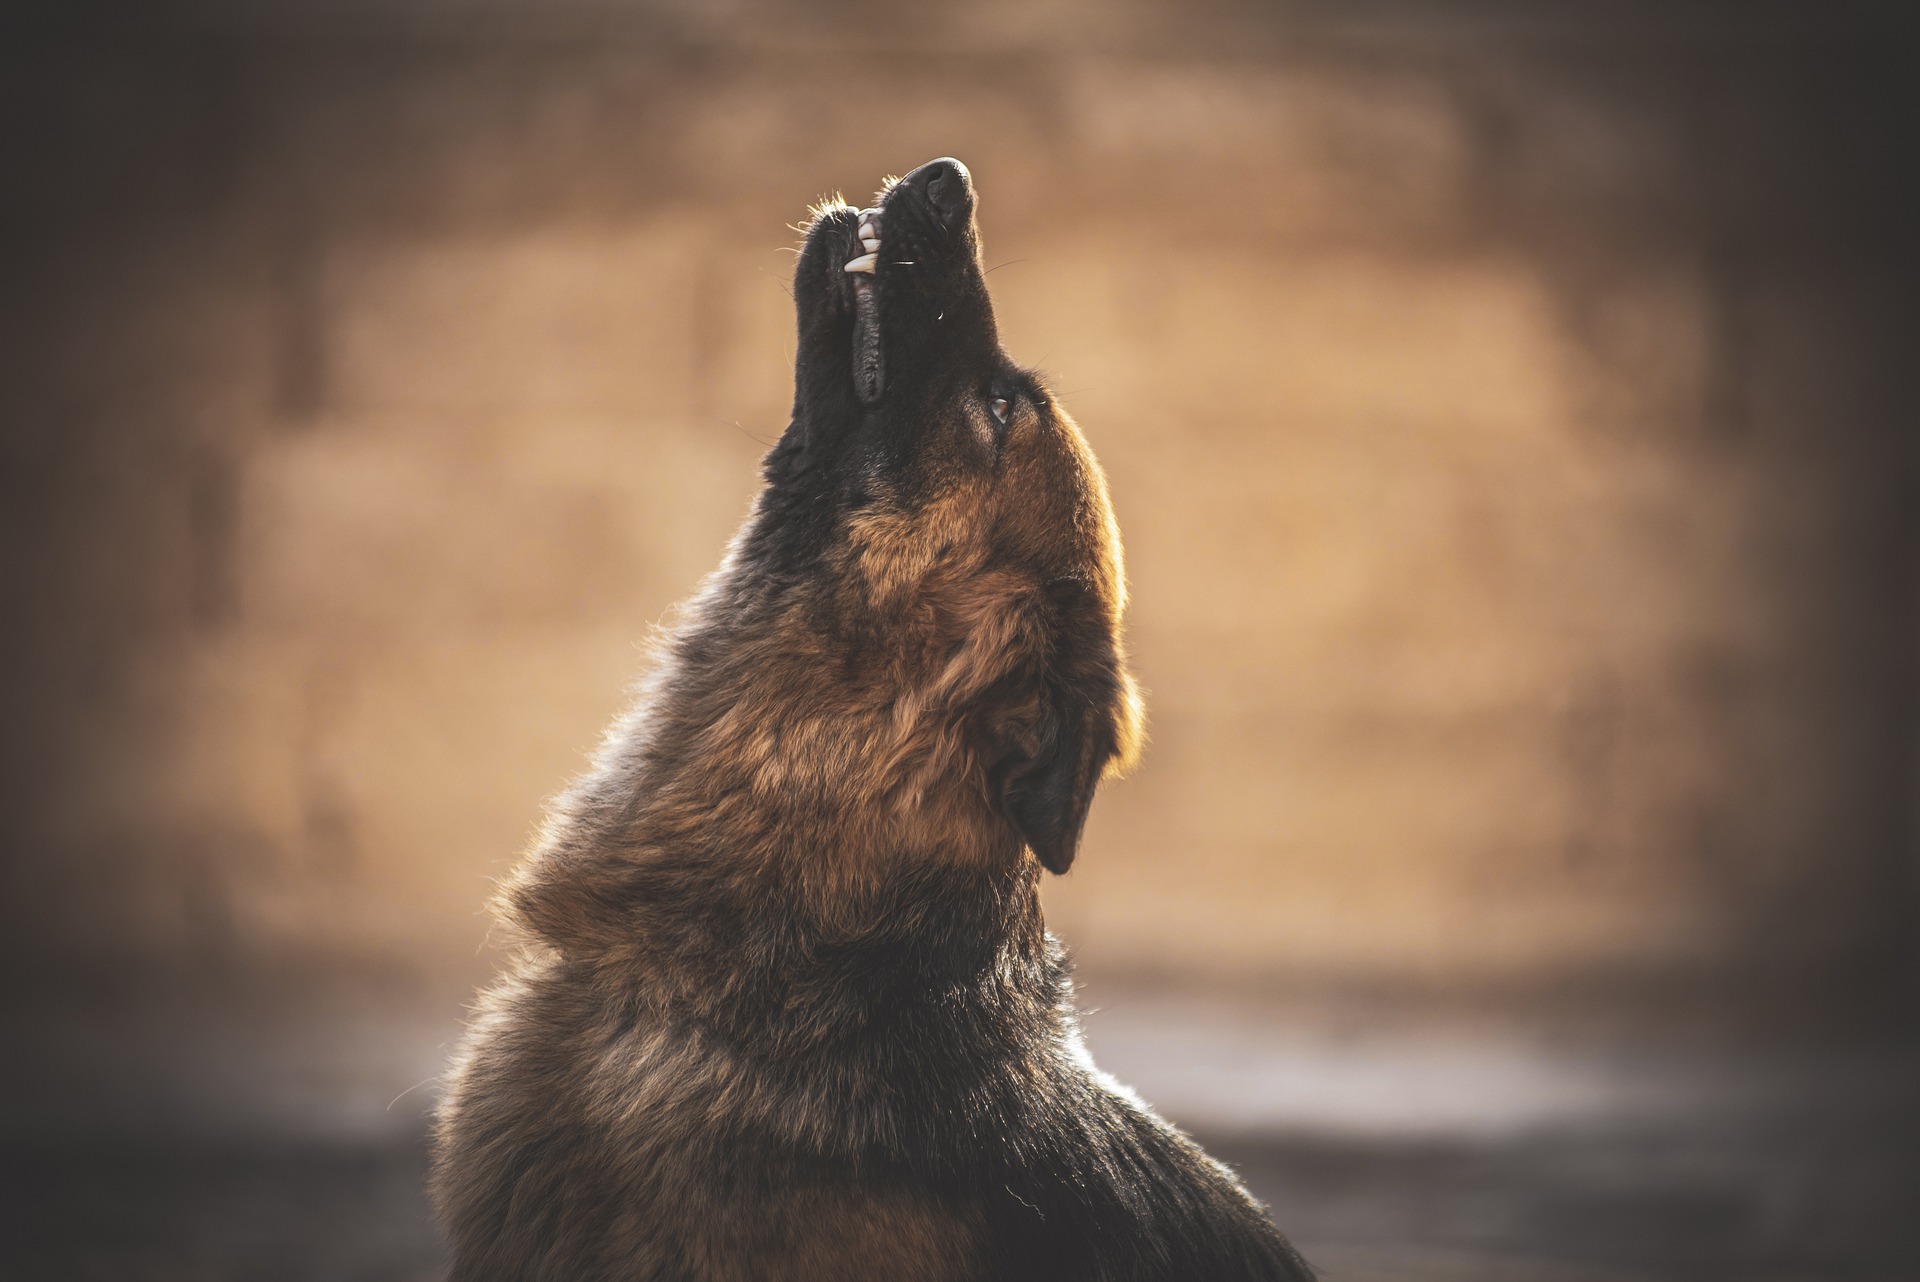 Hungarian Research On Dog Howling